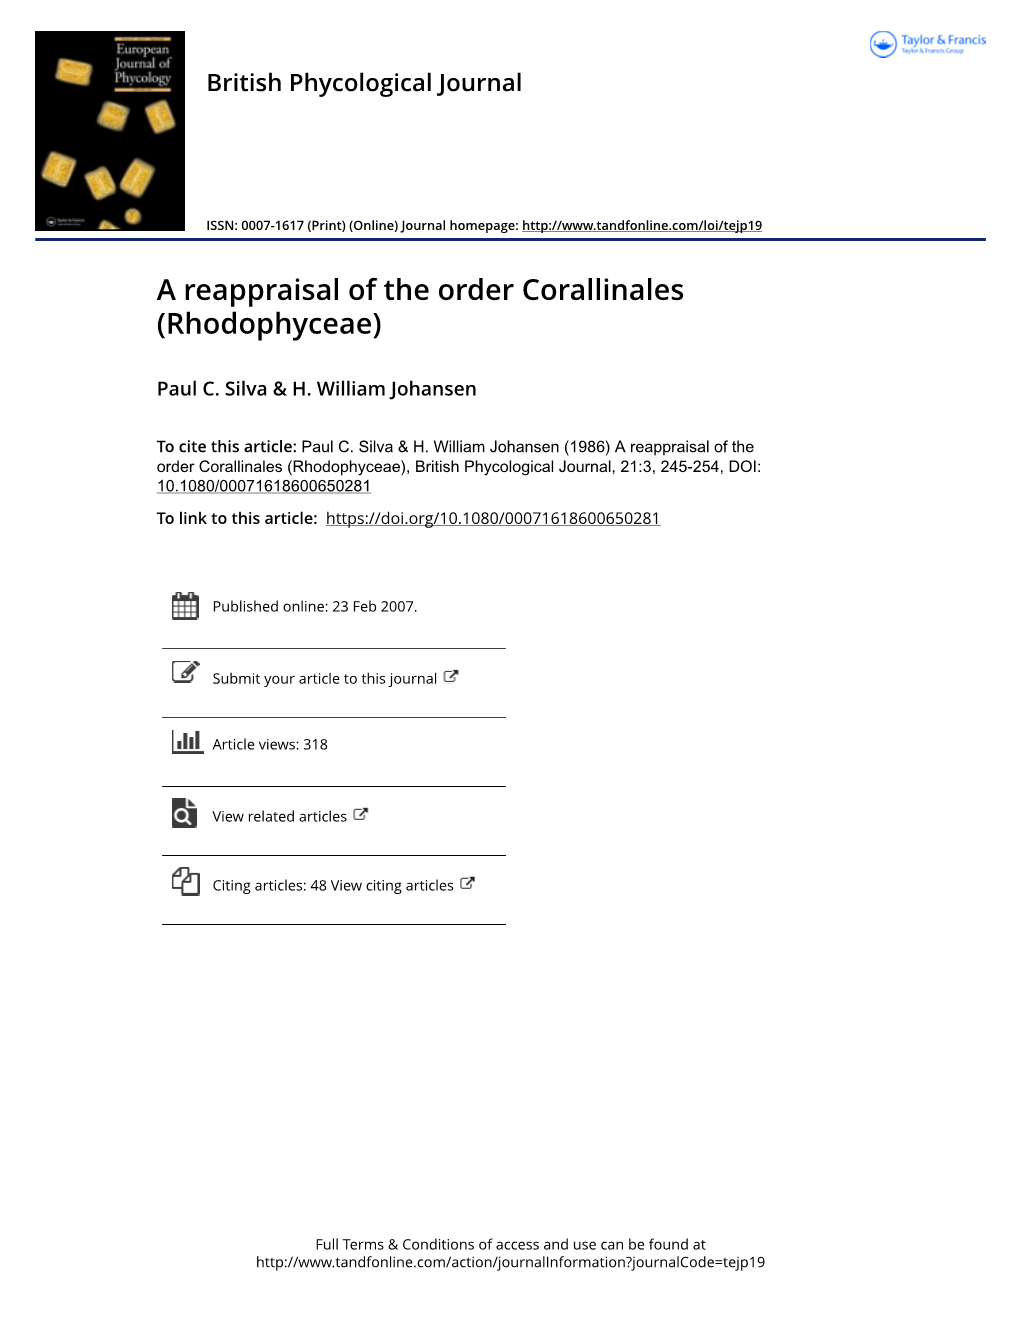 A Reappraisal of the Order Corallinales (Rhodophyceae)